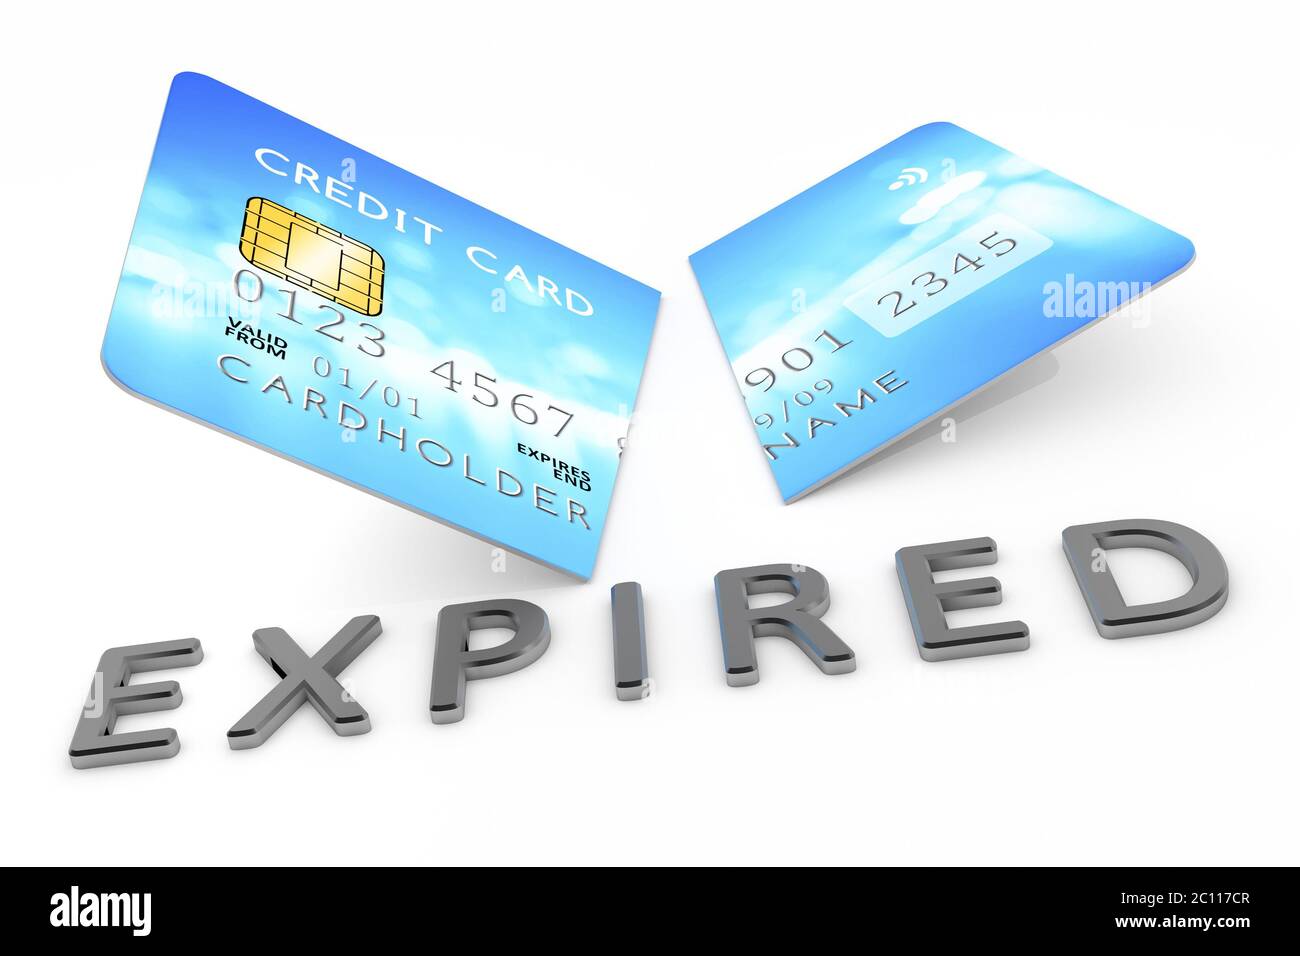 expired cut credit card Stock Photo